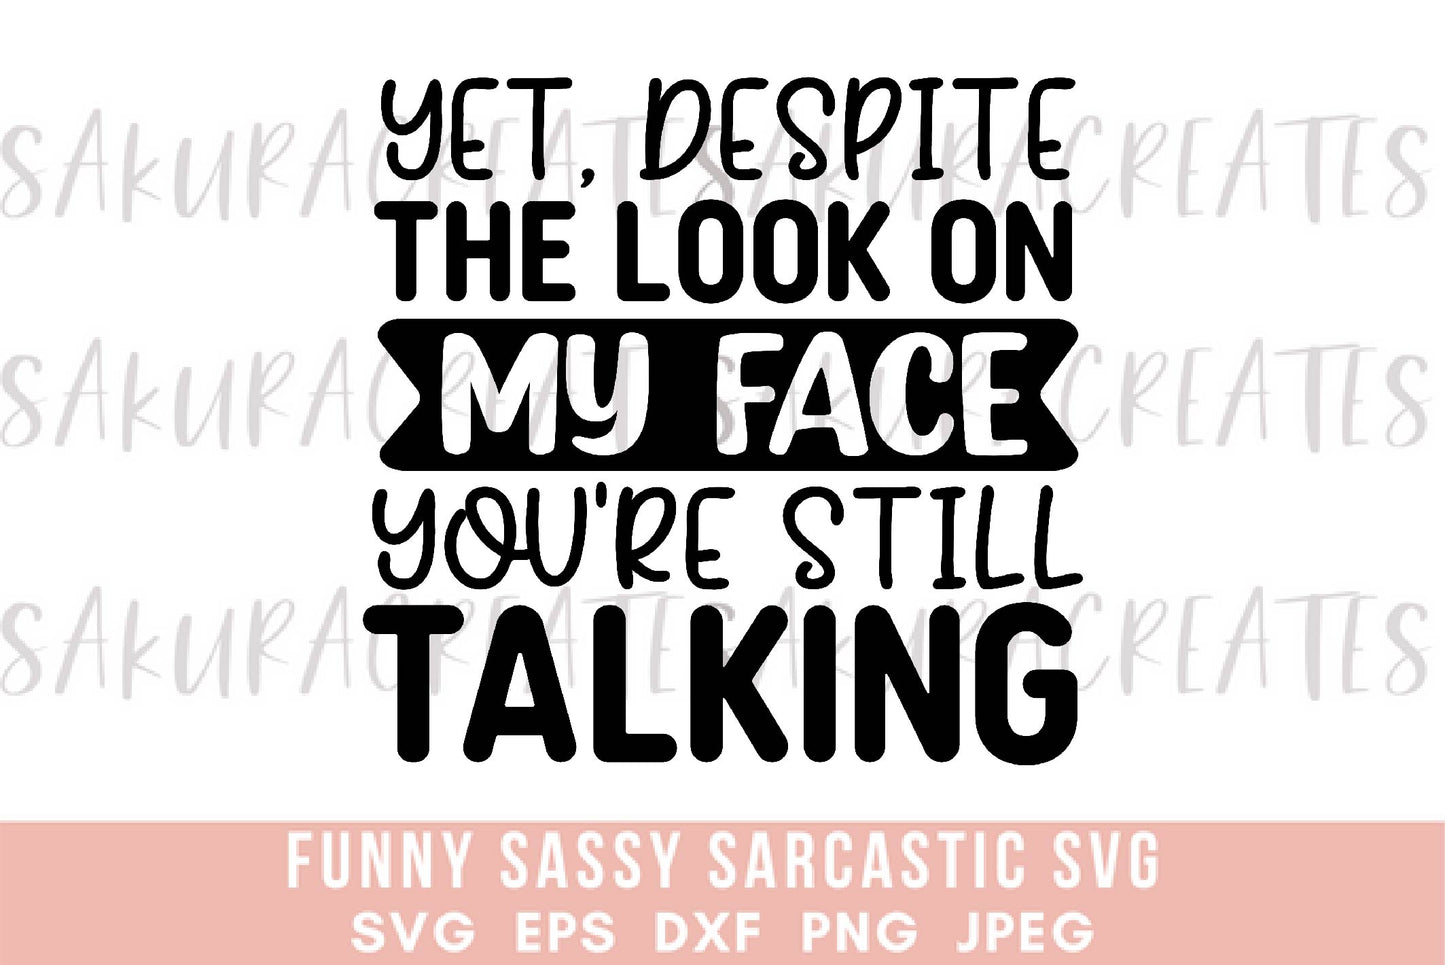 Yet despite the look on my face, you're still talking SVG DXF EPS PNG JPEG SVG cut file silhouette cricut funny sarcastic sassy quotes sayings